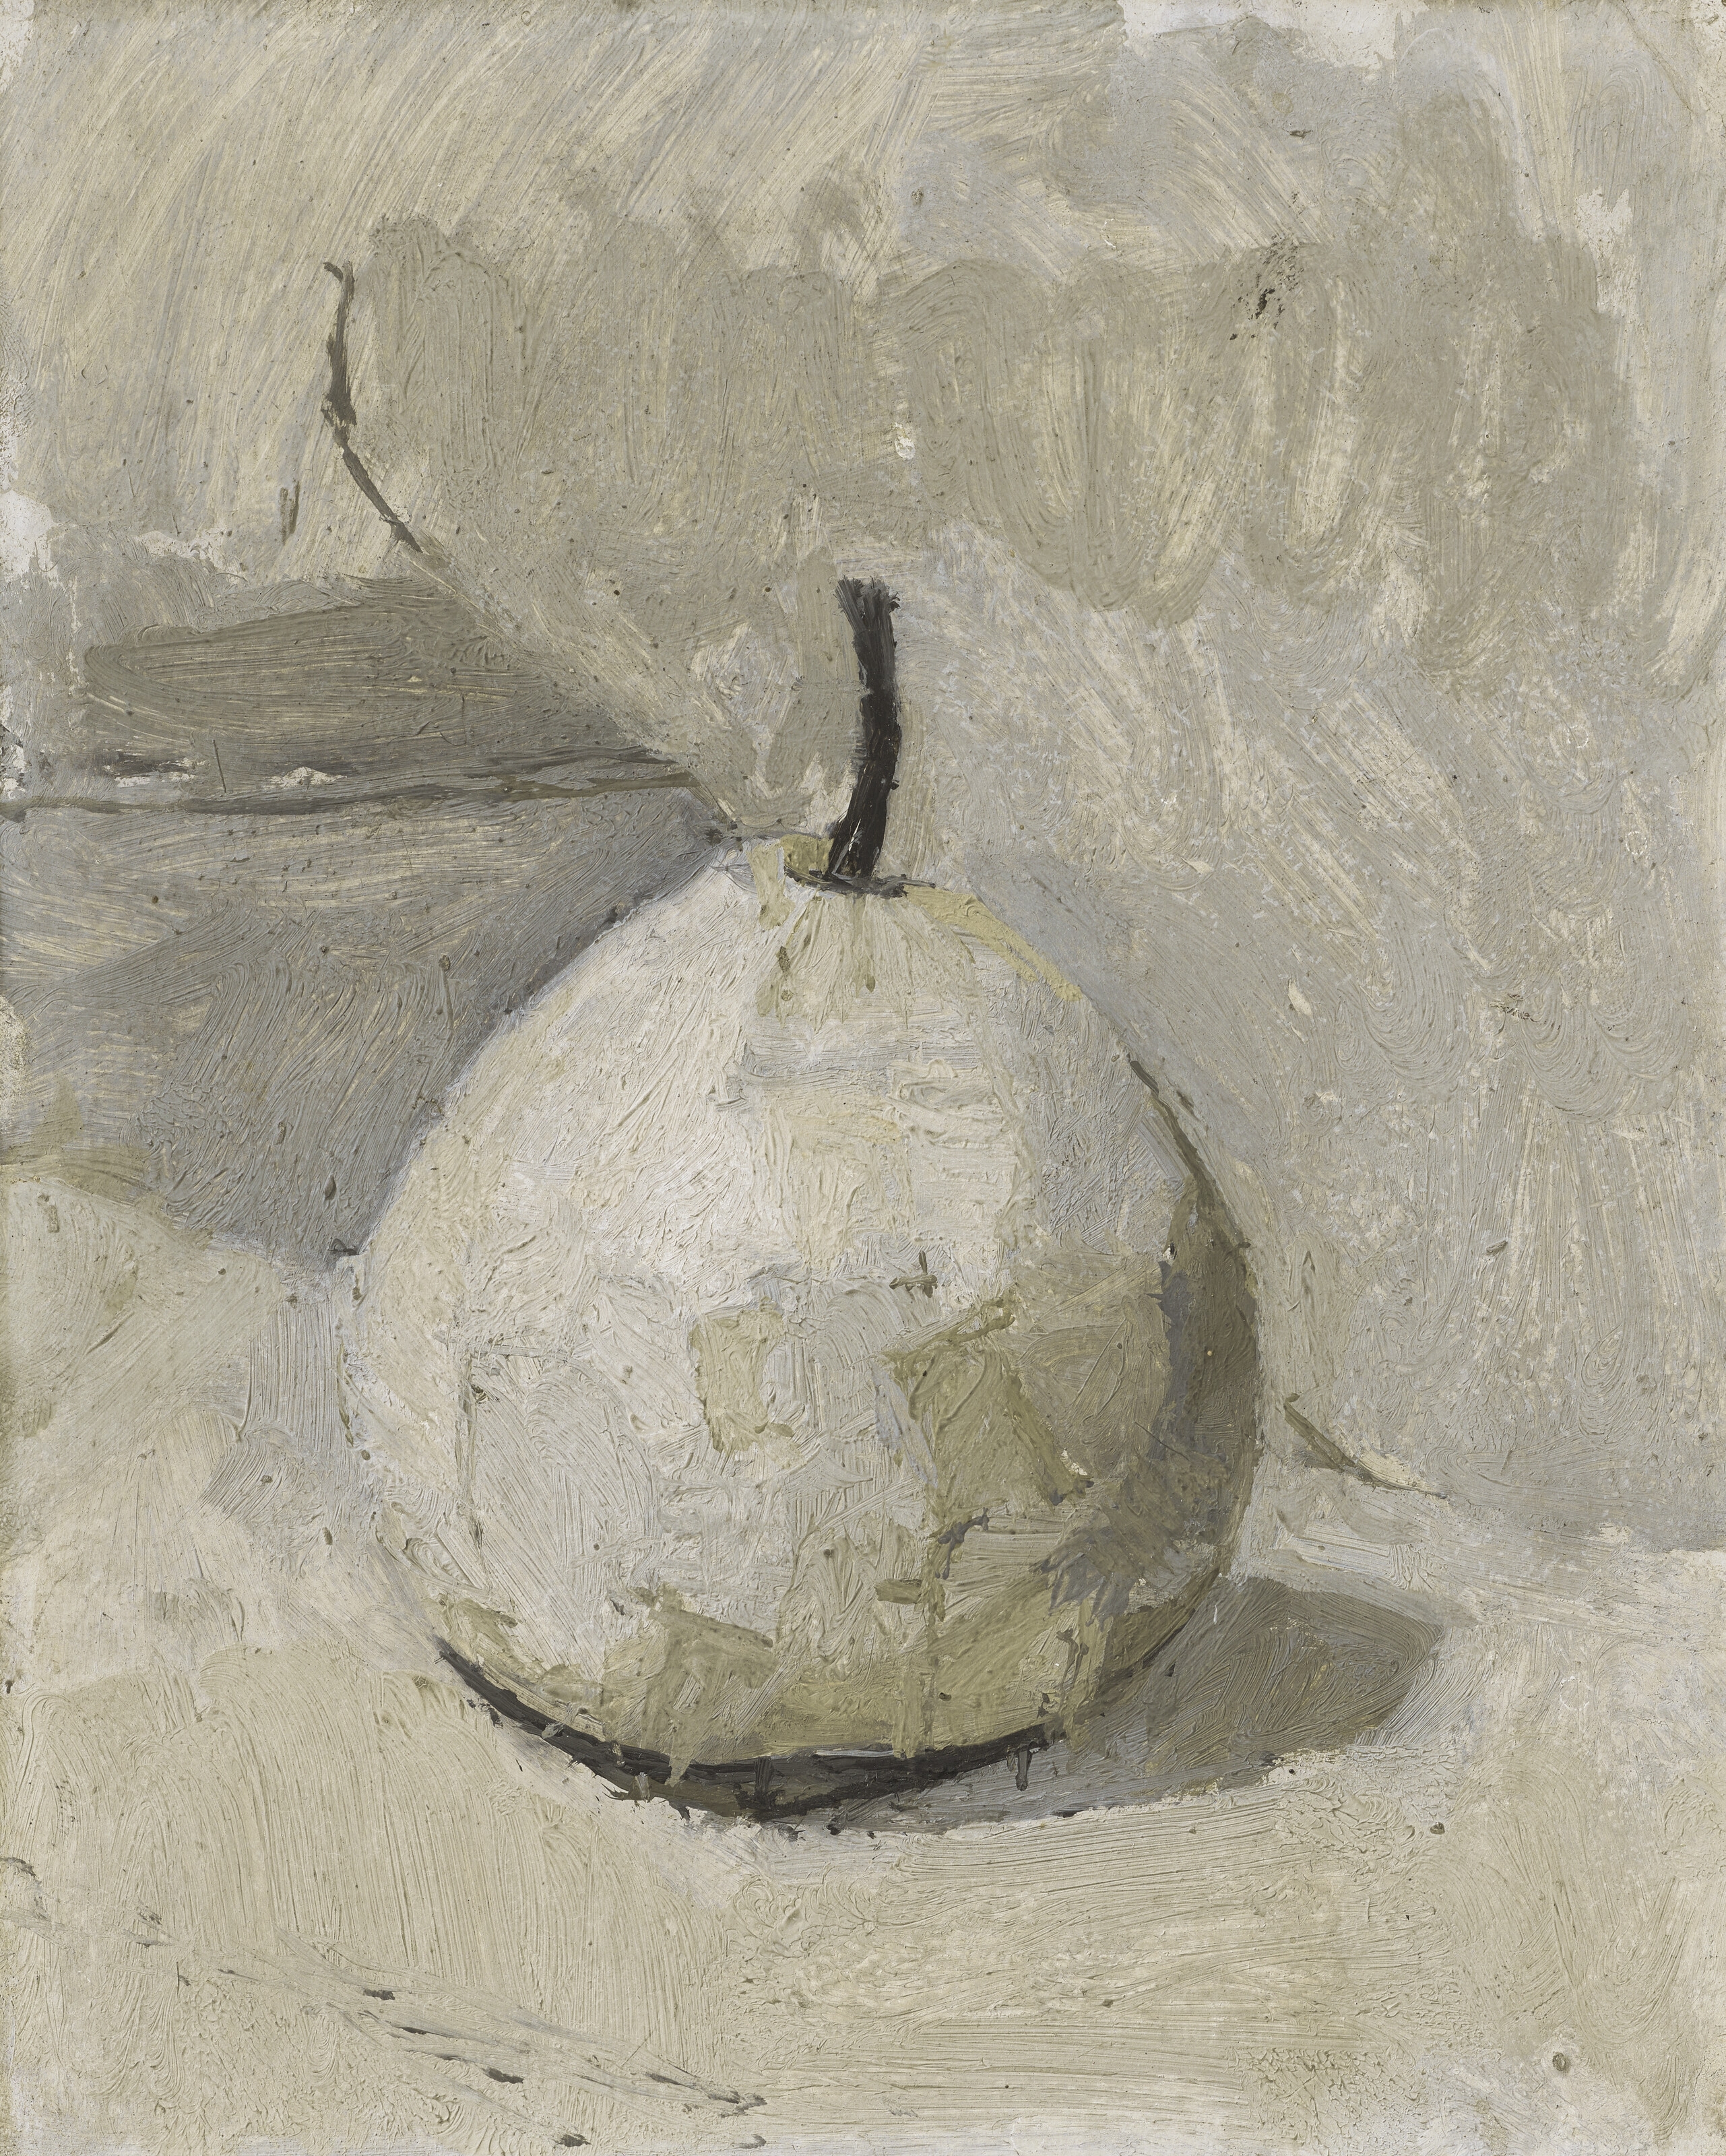 White Pear by Euan Uglow, Painted in 1960